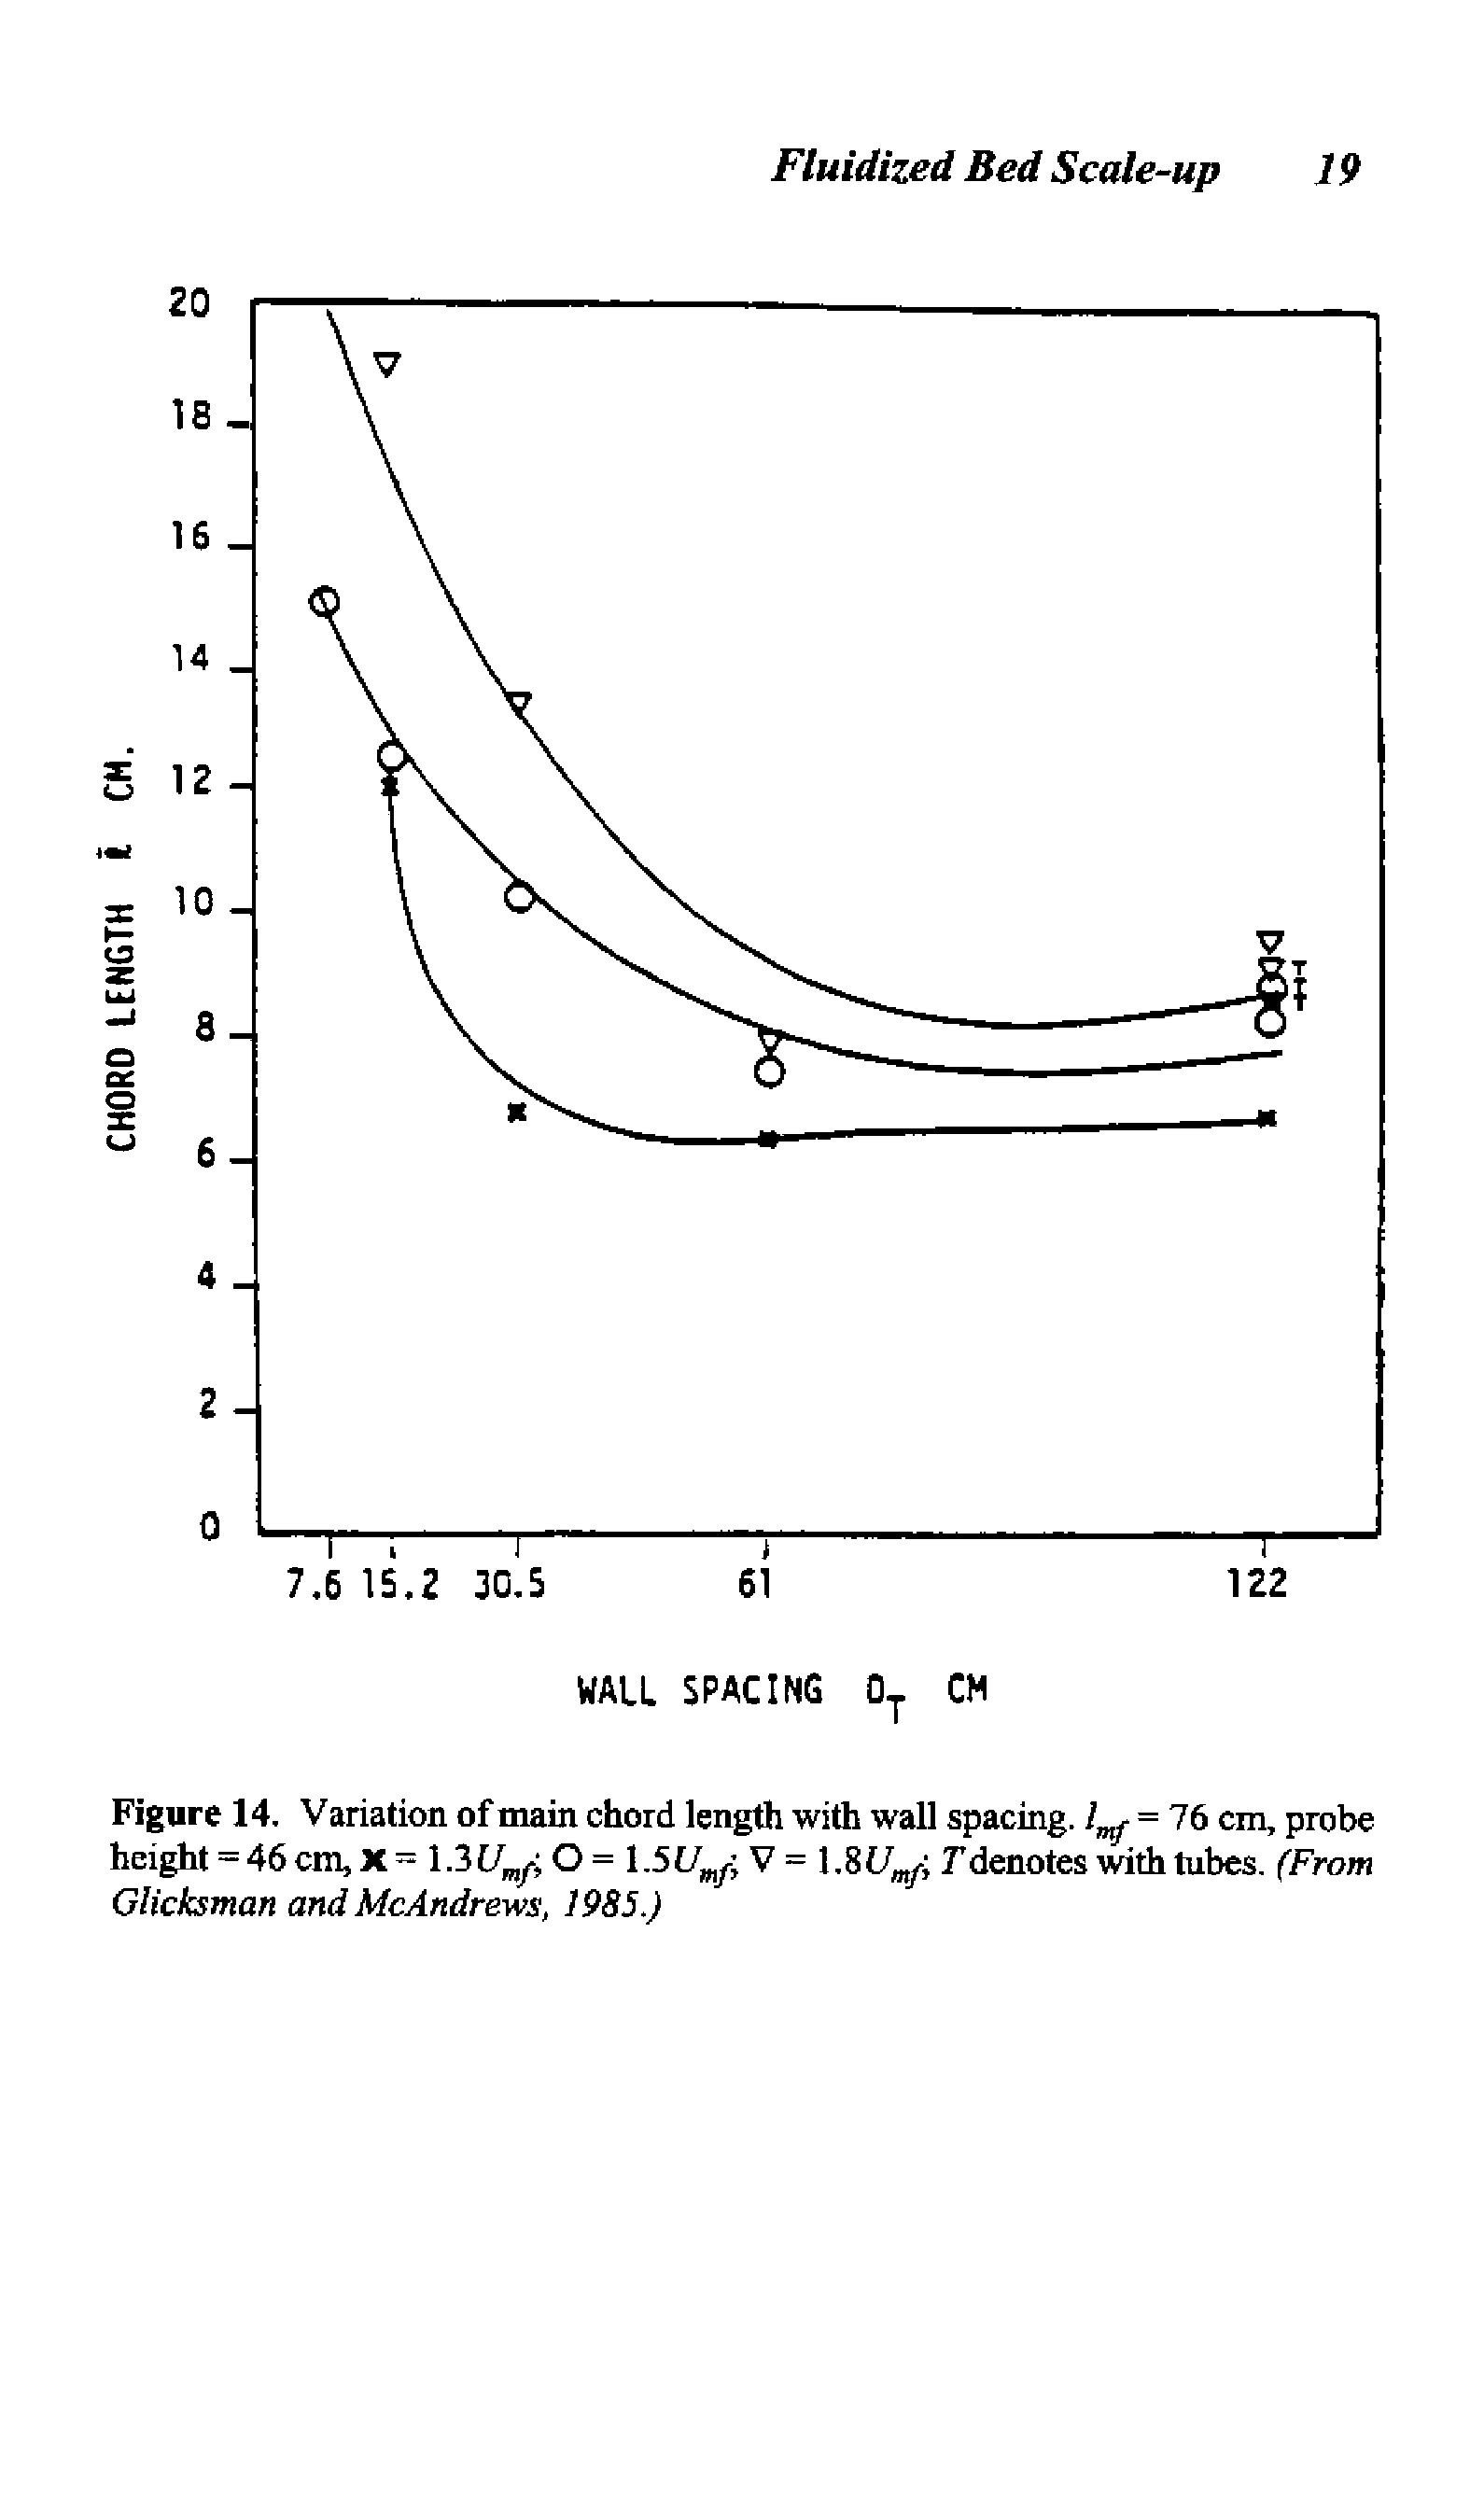 Figure 14. Variation of main chord length with wall spacing. lmf = 76 cm, probe height = 46 cm, X = 1.3 Ump O = 1.5Umy, V = Tdenotes with tubes. (From Glicksman and McAndrews, 1985.)...